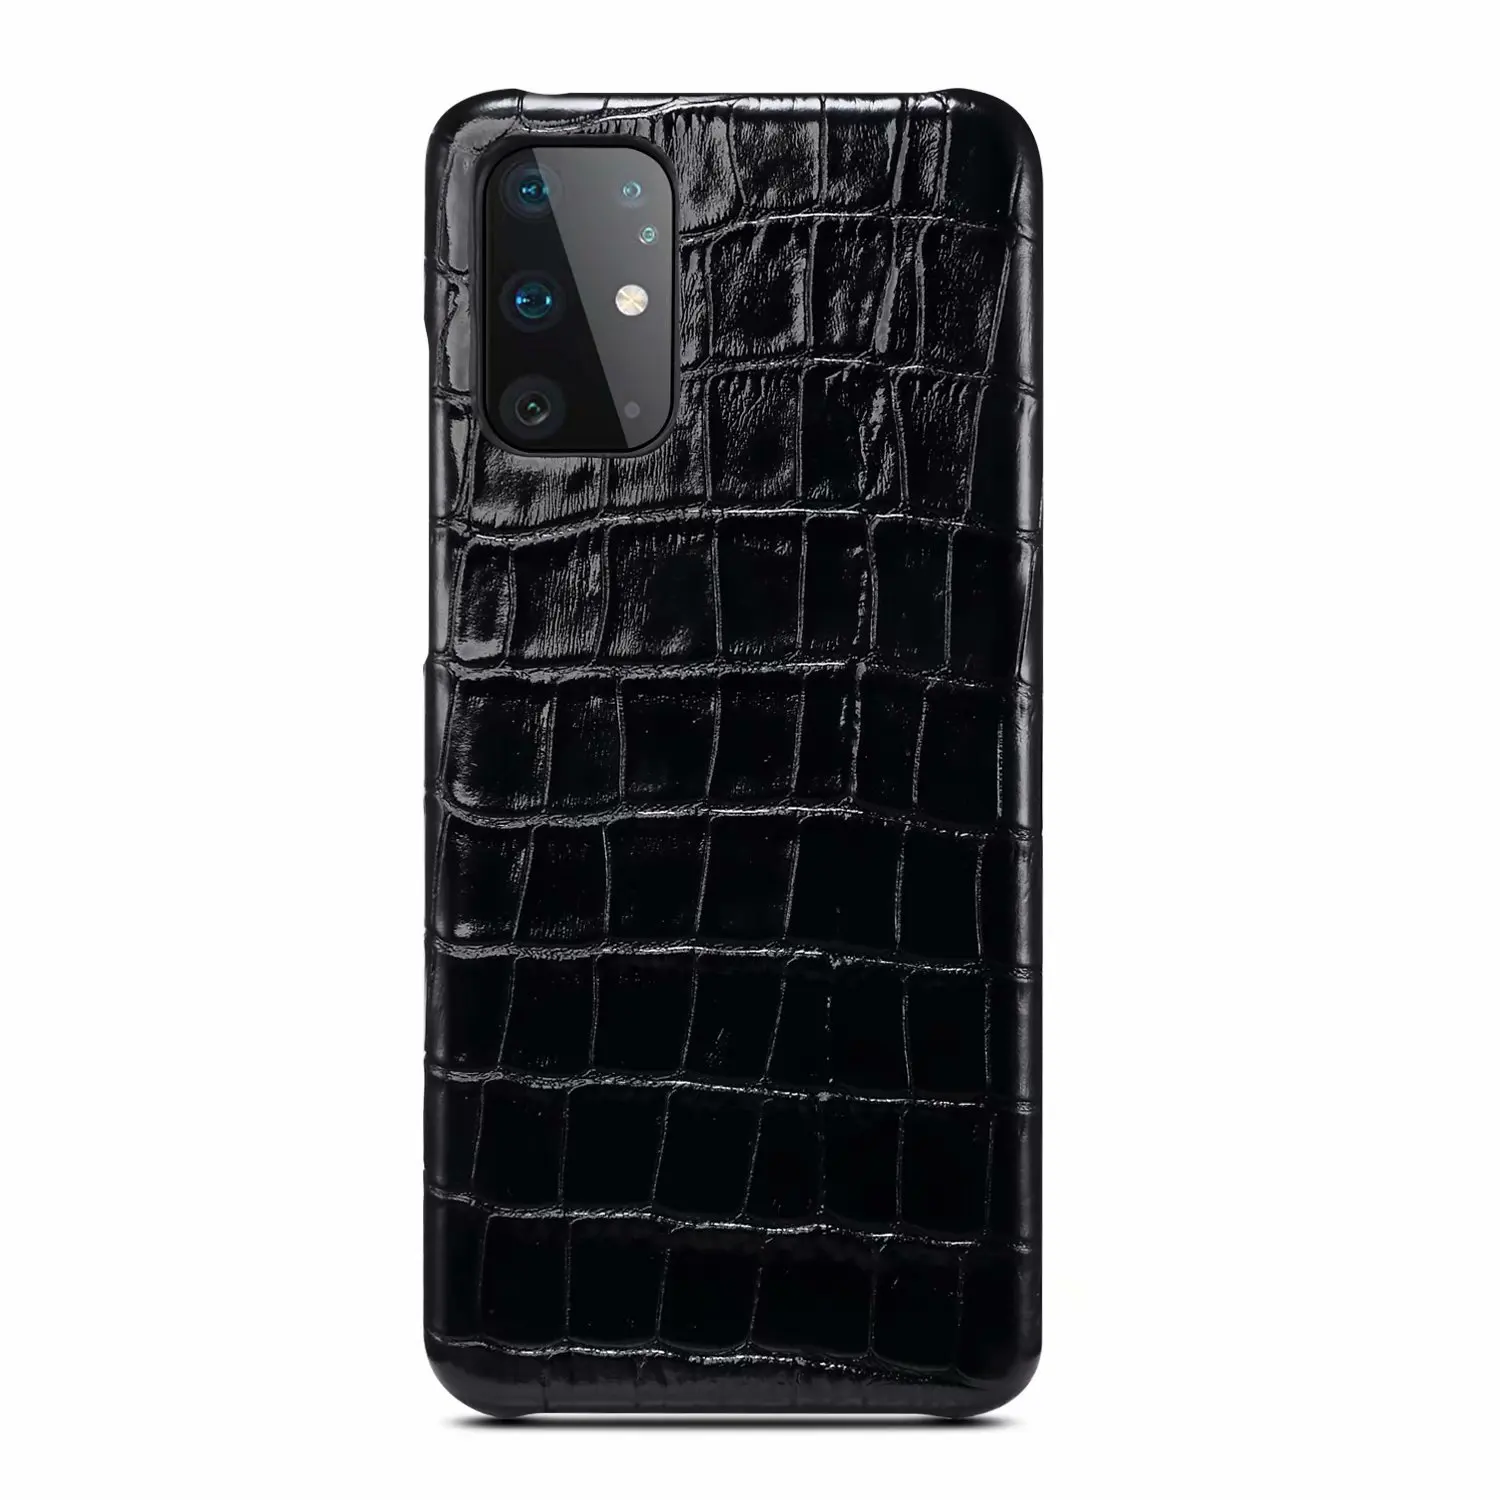 

HOCAYU Luxury Crocodile Grain Genuine Real Leather Mobile Phone Case Back Cover For Samsung Galaxy S20 Plus Fundas Celular, Black,brown,blue,red